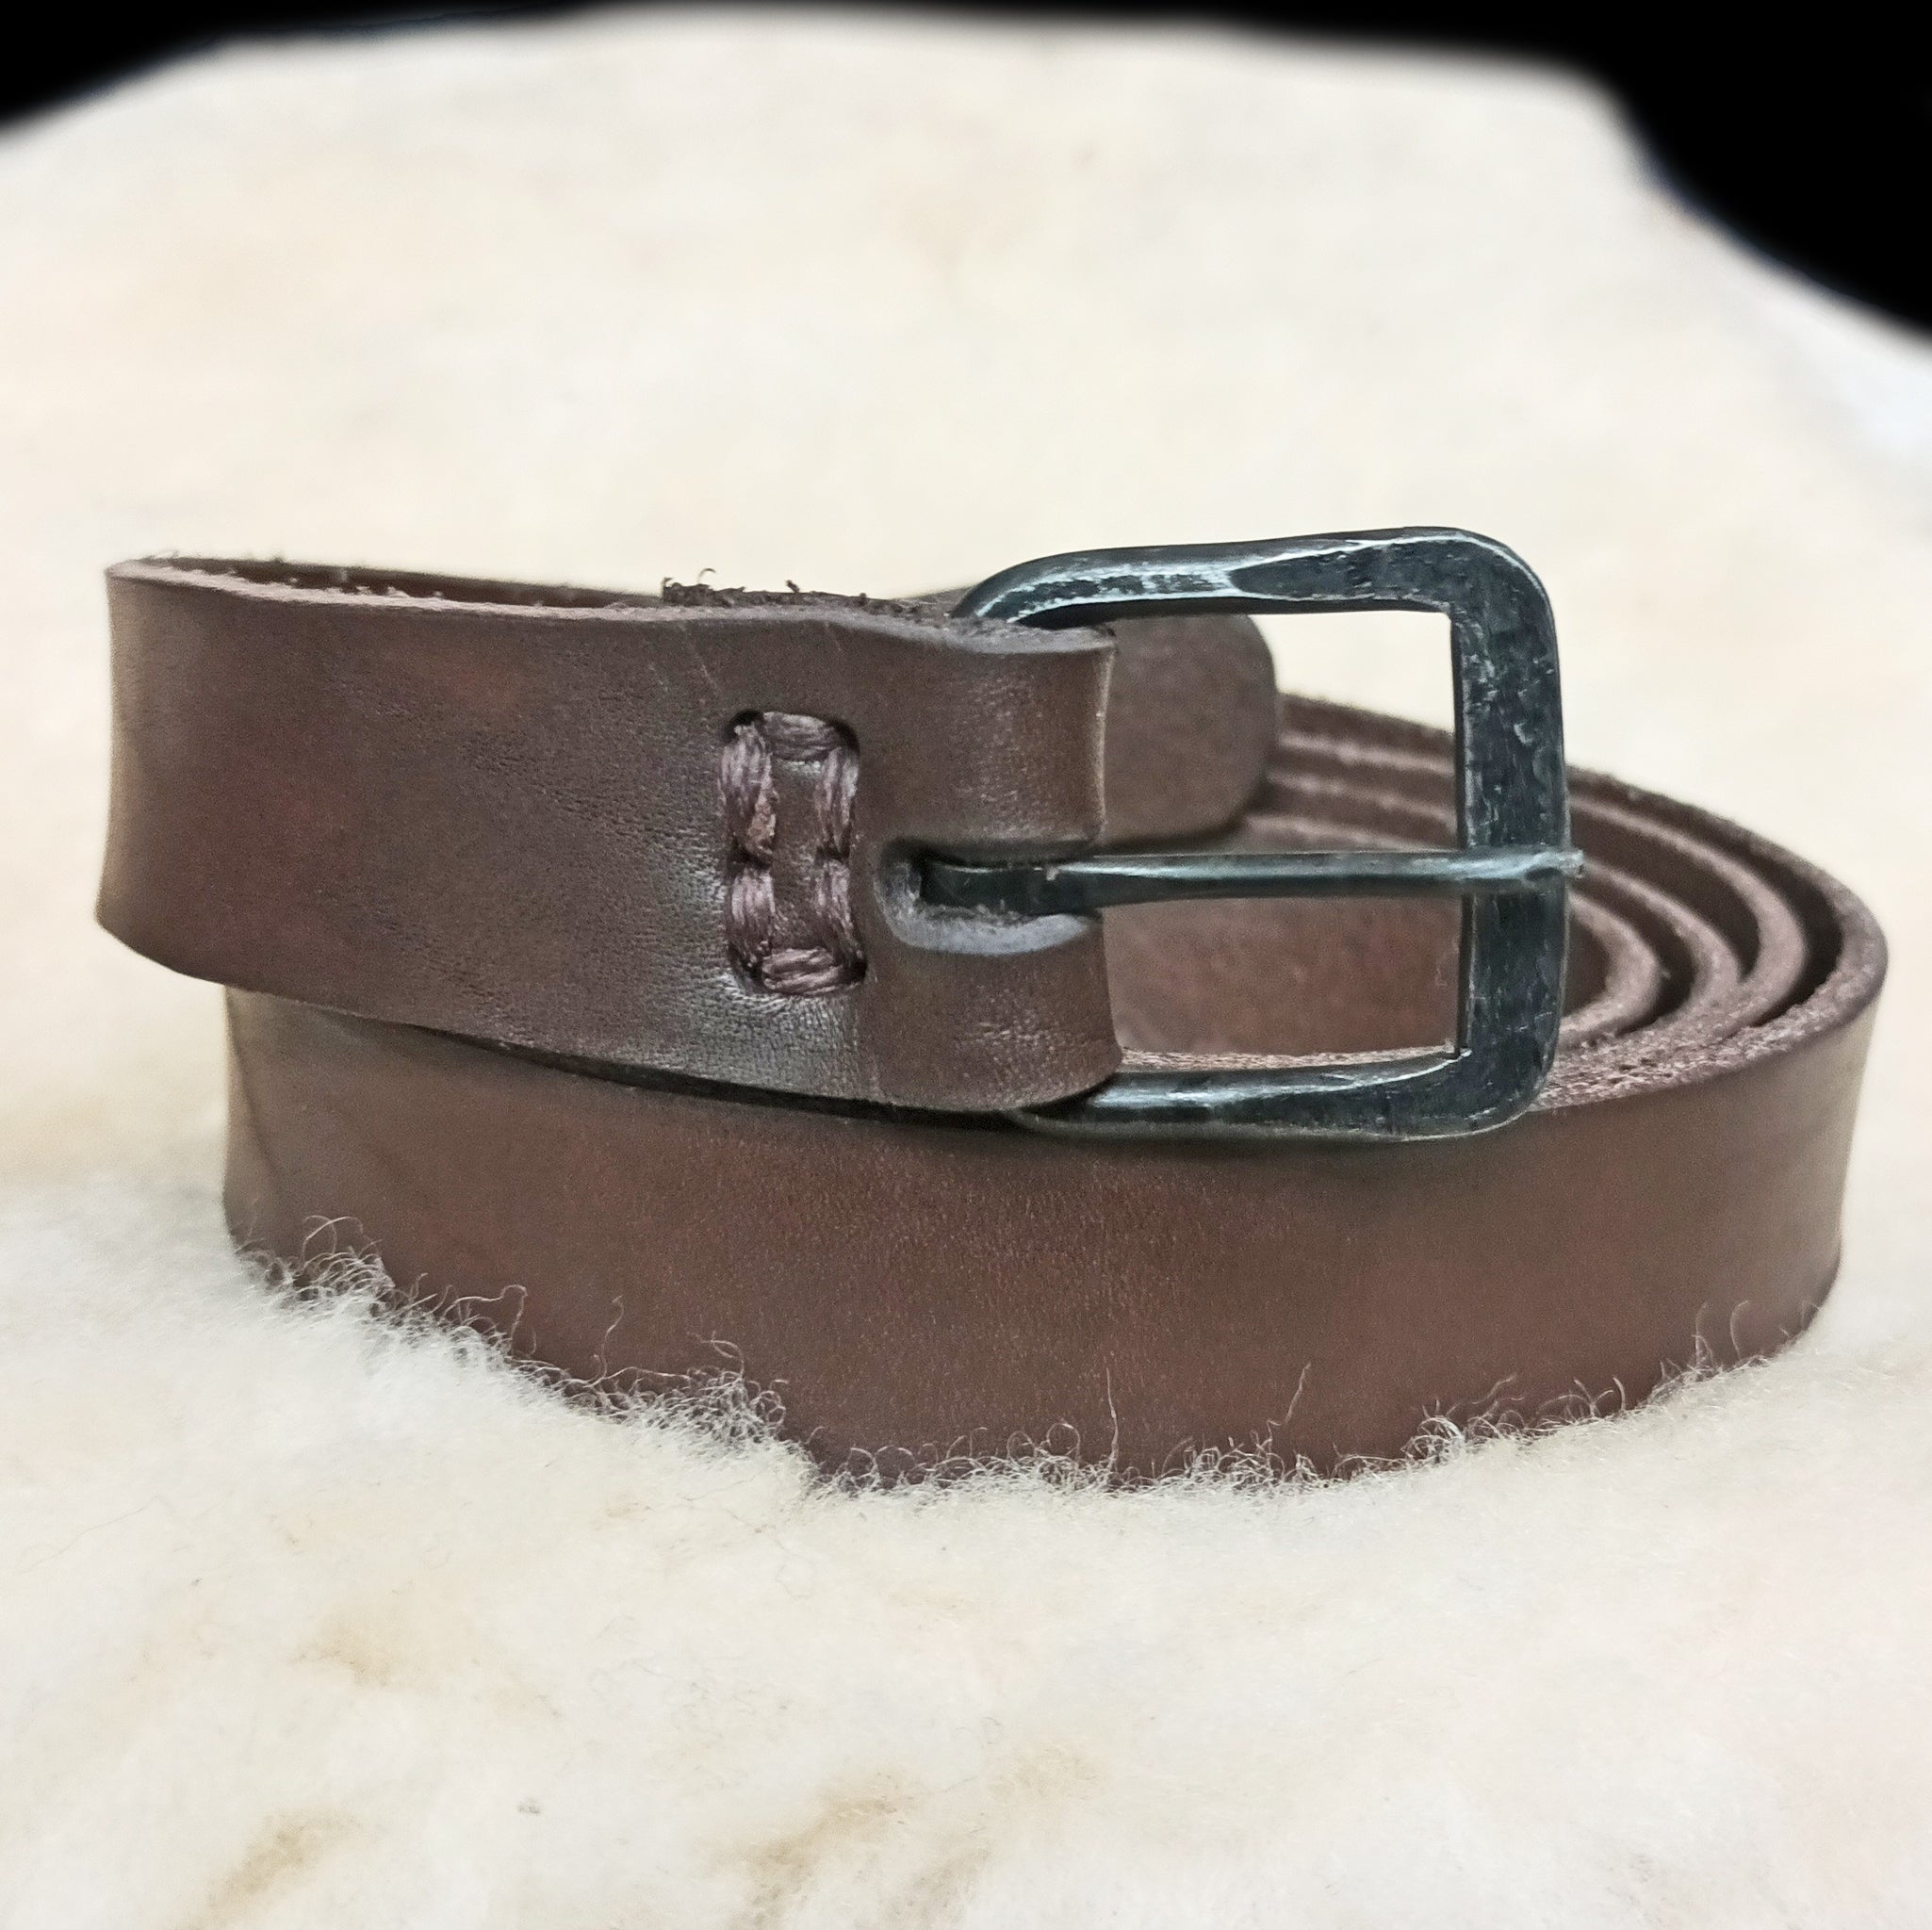 Long Leather Viking / Medieval Belt with Hand-Forged Iron Buckle - 25mm (1  inch) Width